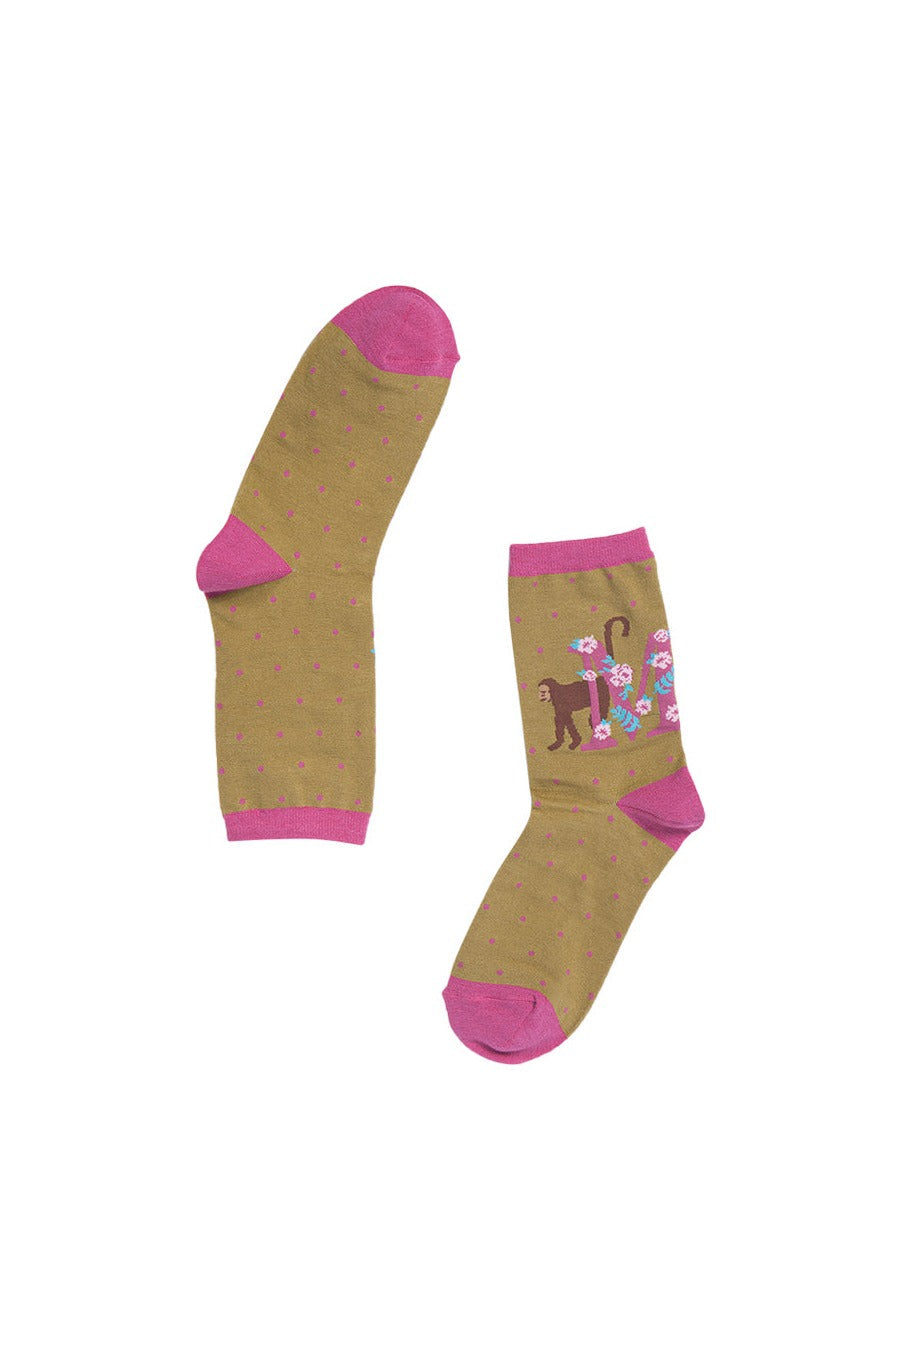 mustard yellow, pink bamboo socks with the initial M